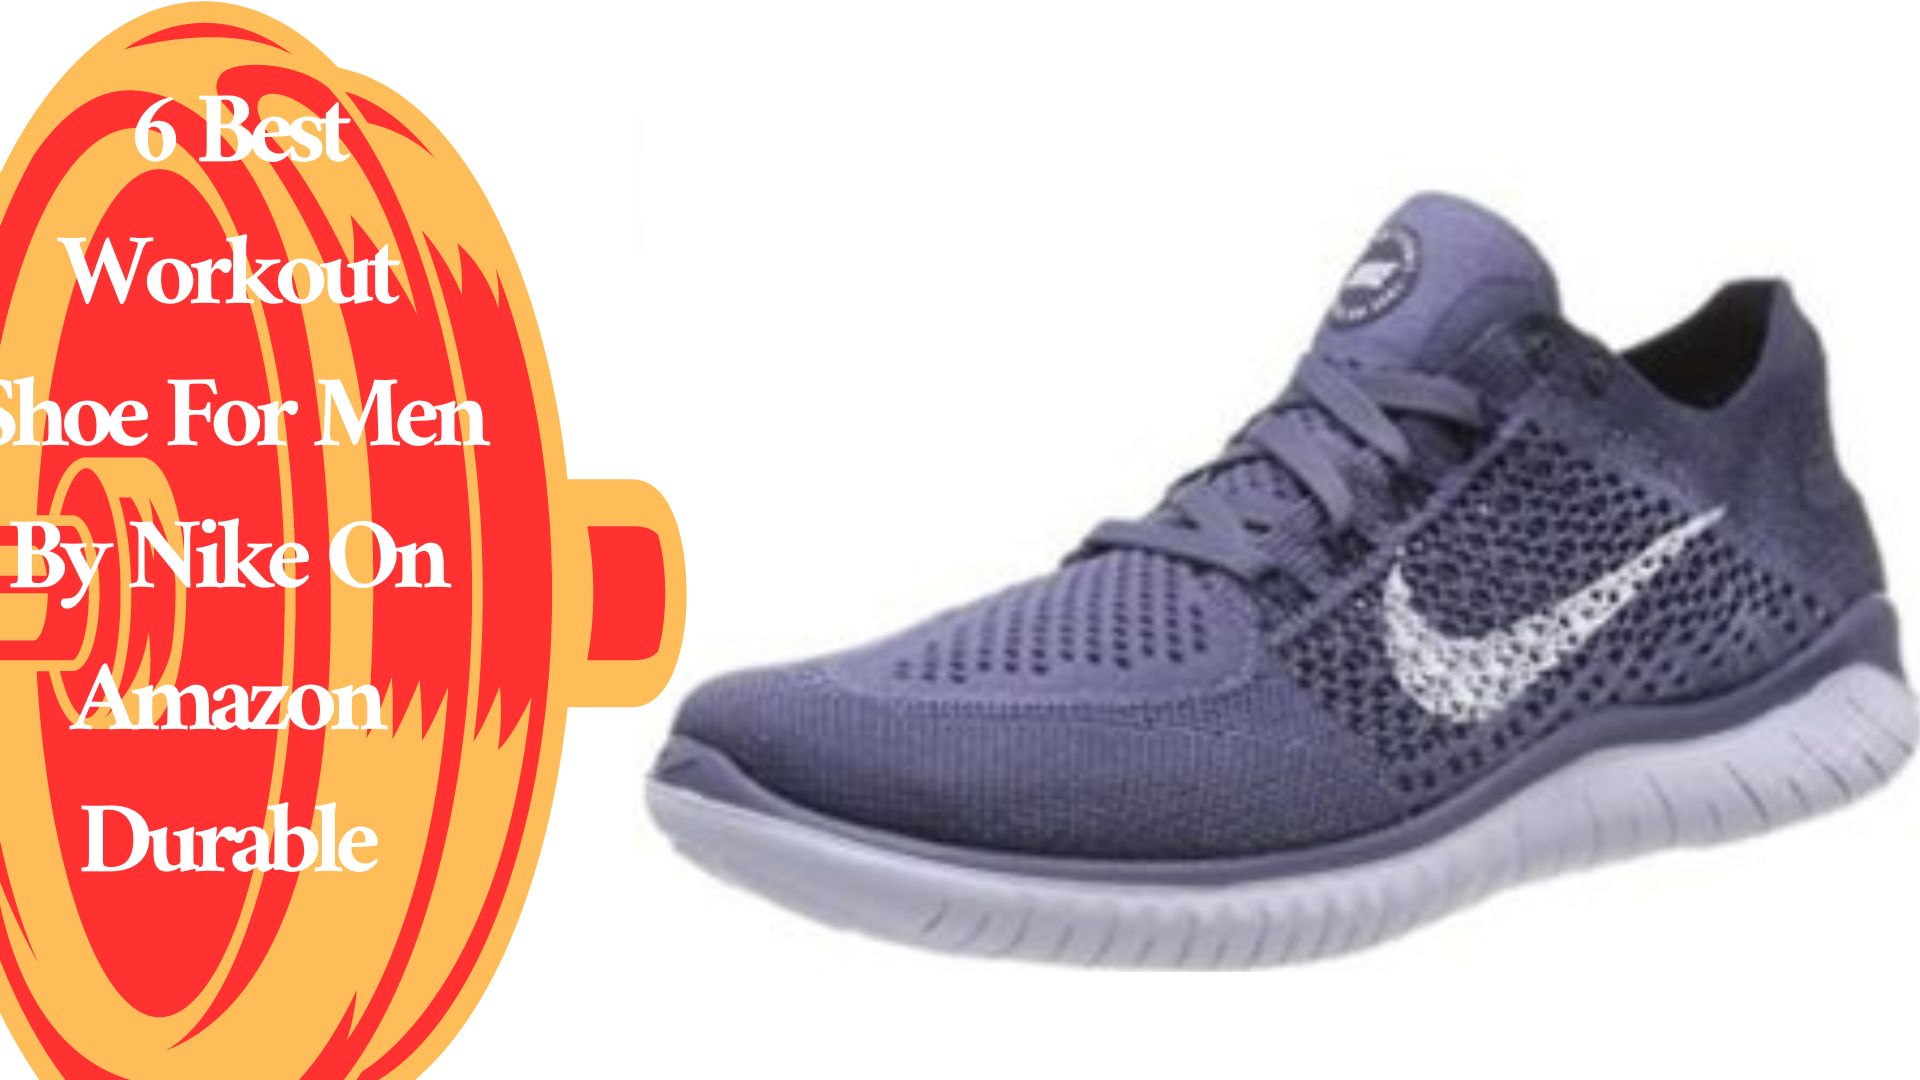 6 Best Workout Shoe For Men By Nike On Amazon Durable